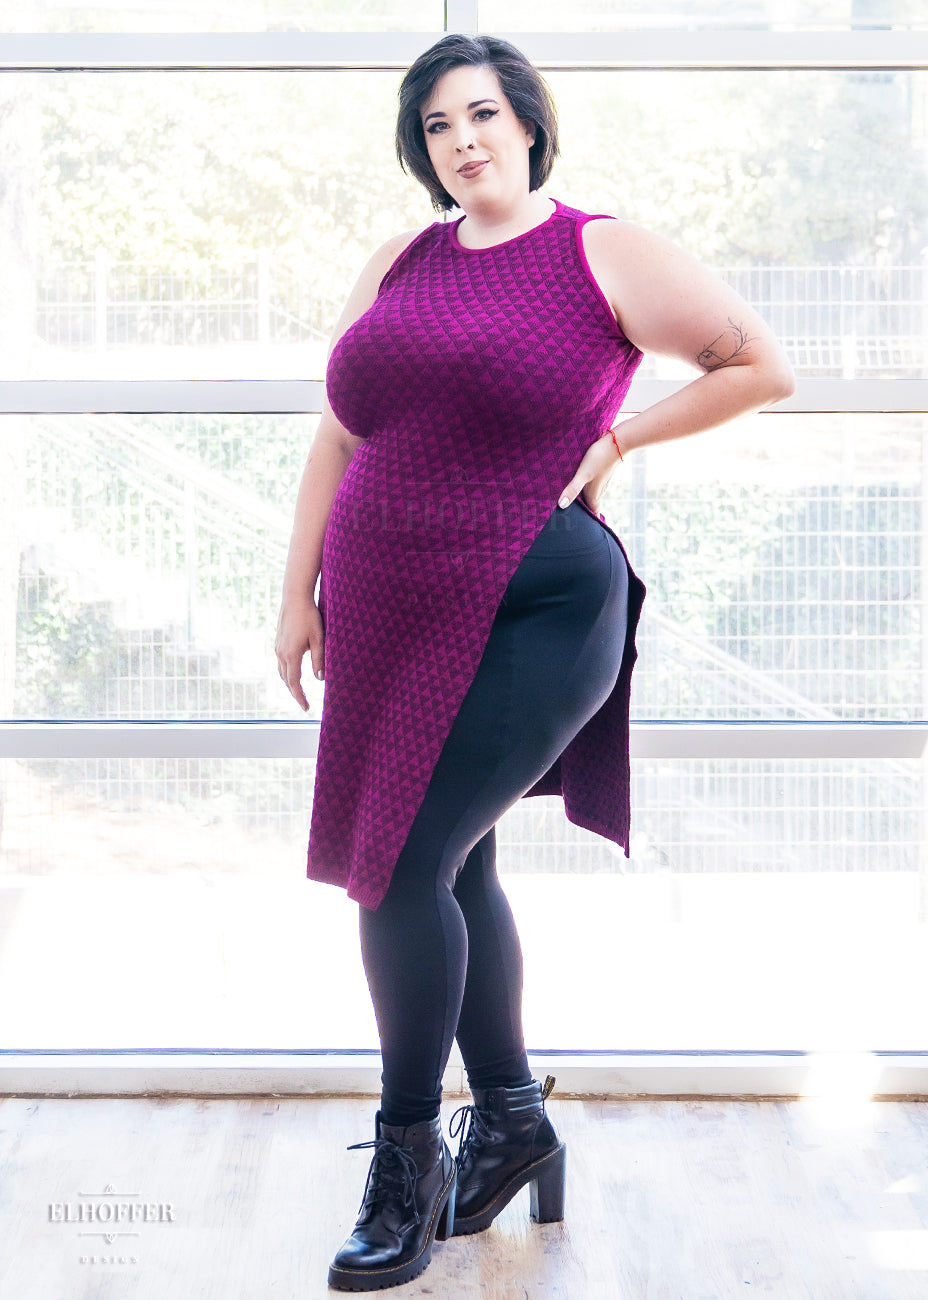 Katie Lynn, a fair skinned size 2XL model with short black hair, is wearing a pullover cropped sleeveless knit top with front and back flaps in a magenta triangle knit.